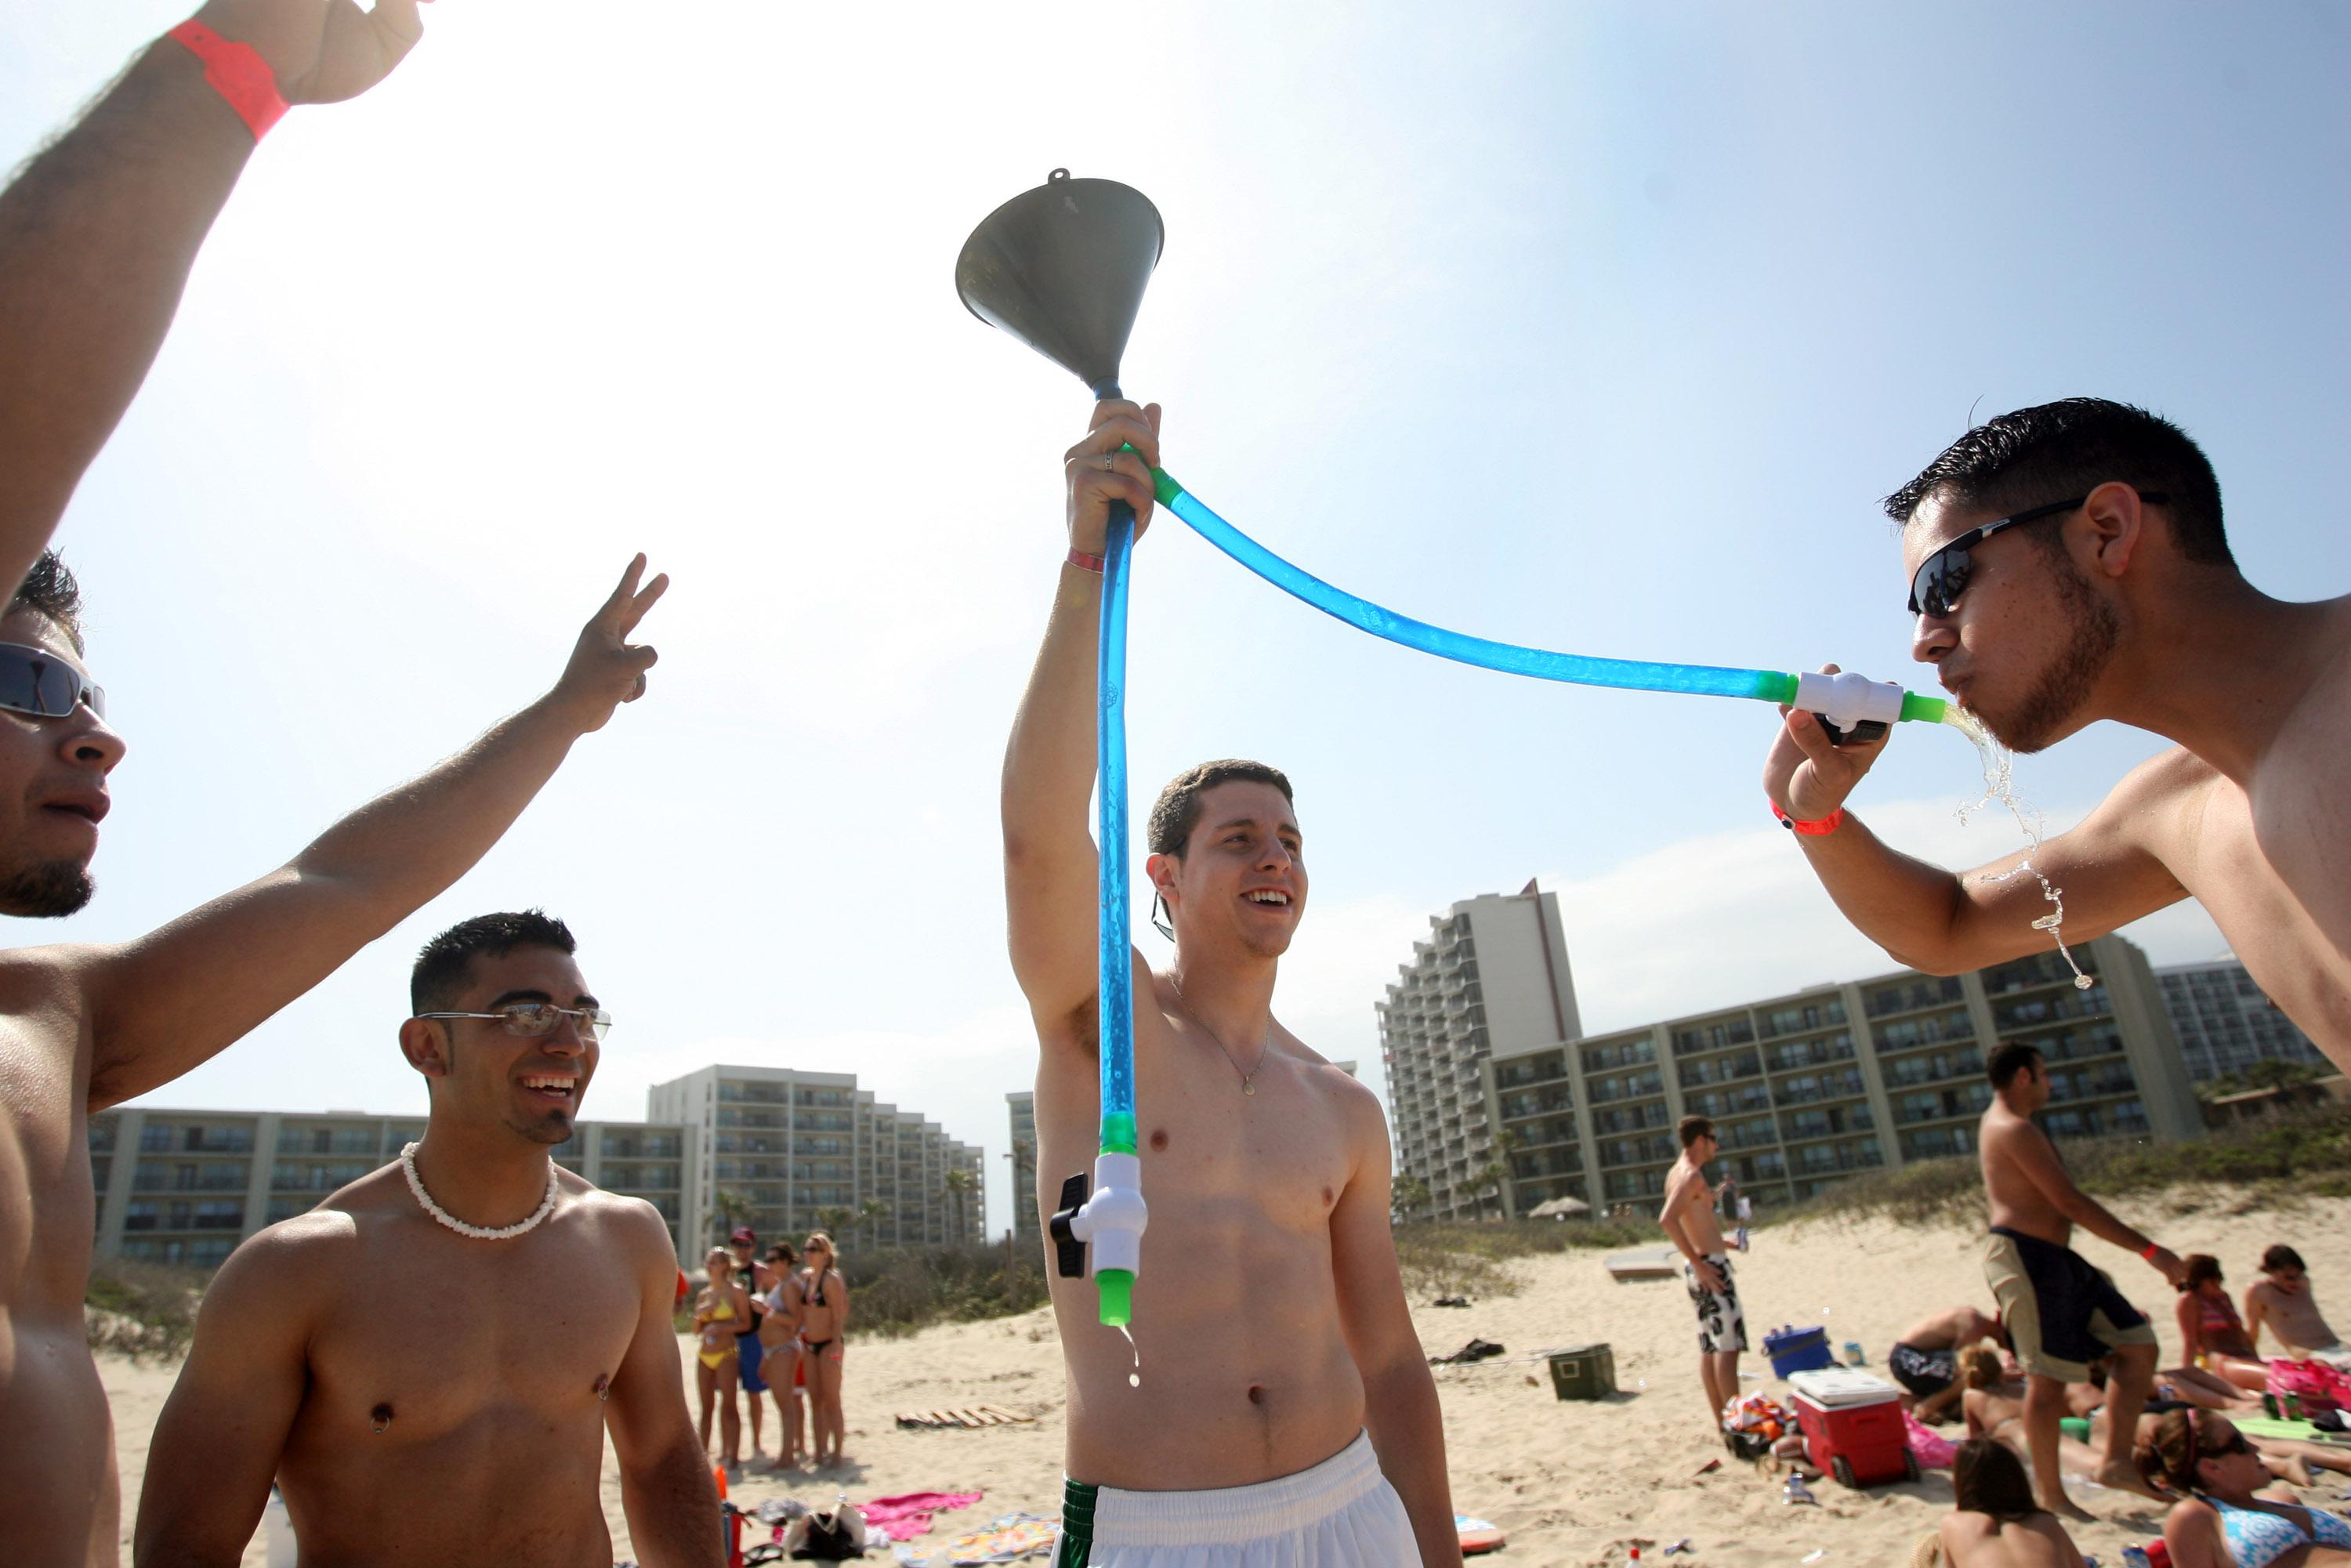 Students from the University of Texas-El Paso drink beer from a funnel on the beach during the annual ritual of Spring Break March 25, 2008, on South Padre Island, Texas.